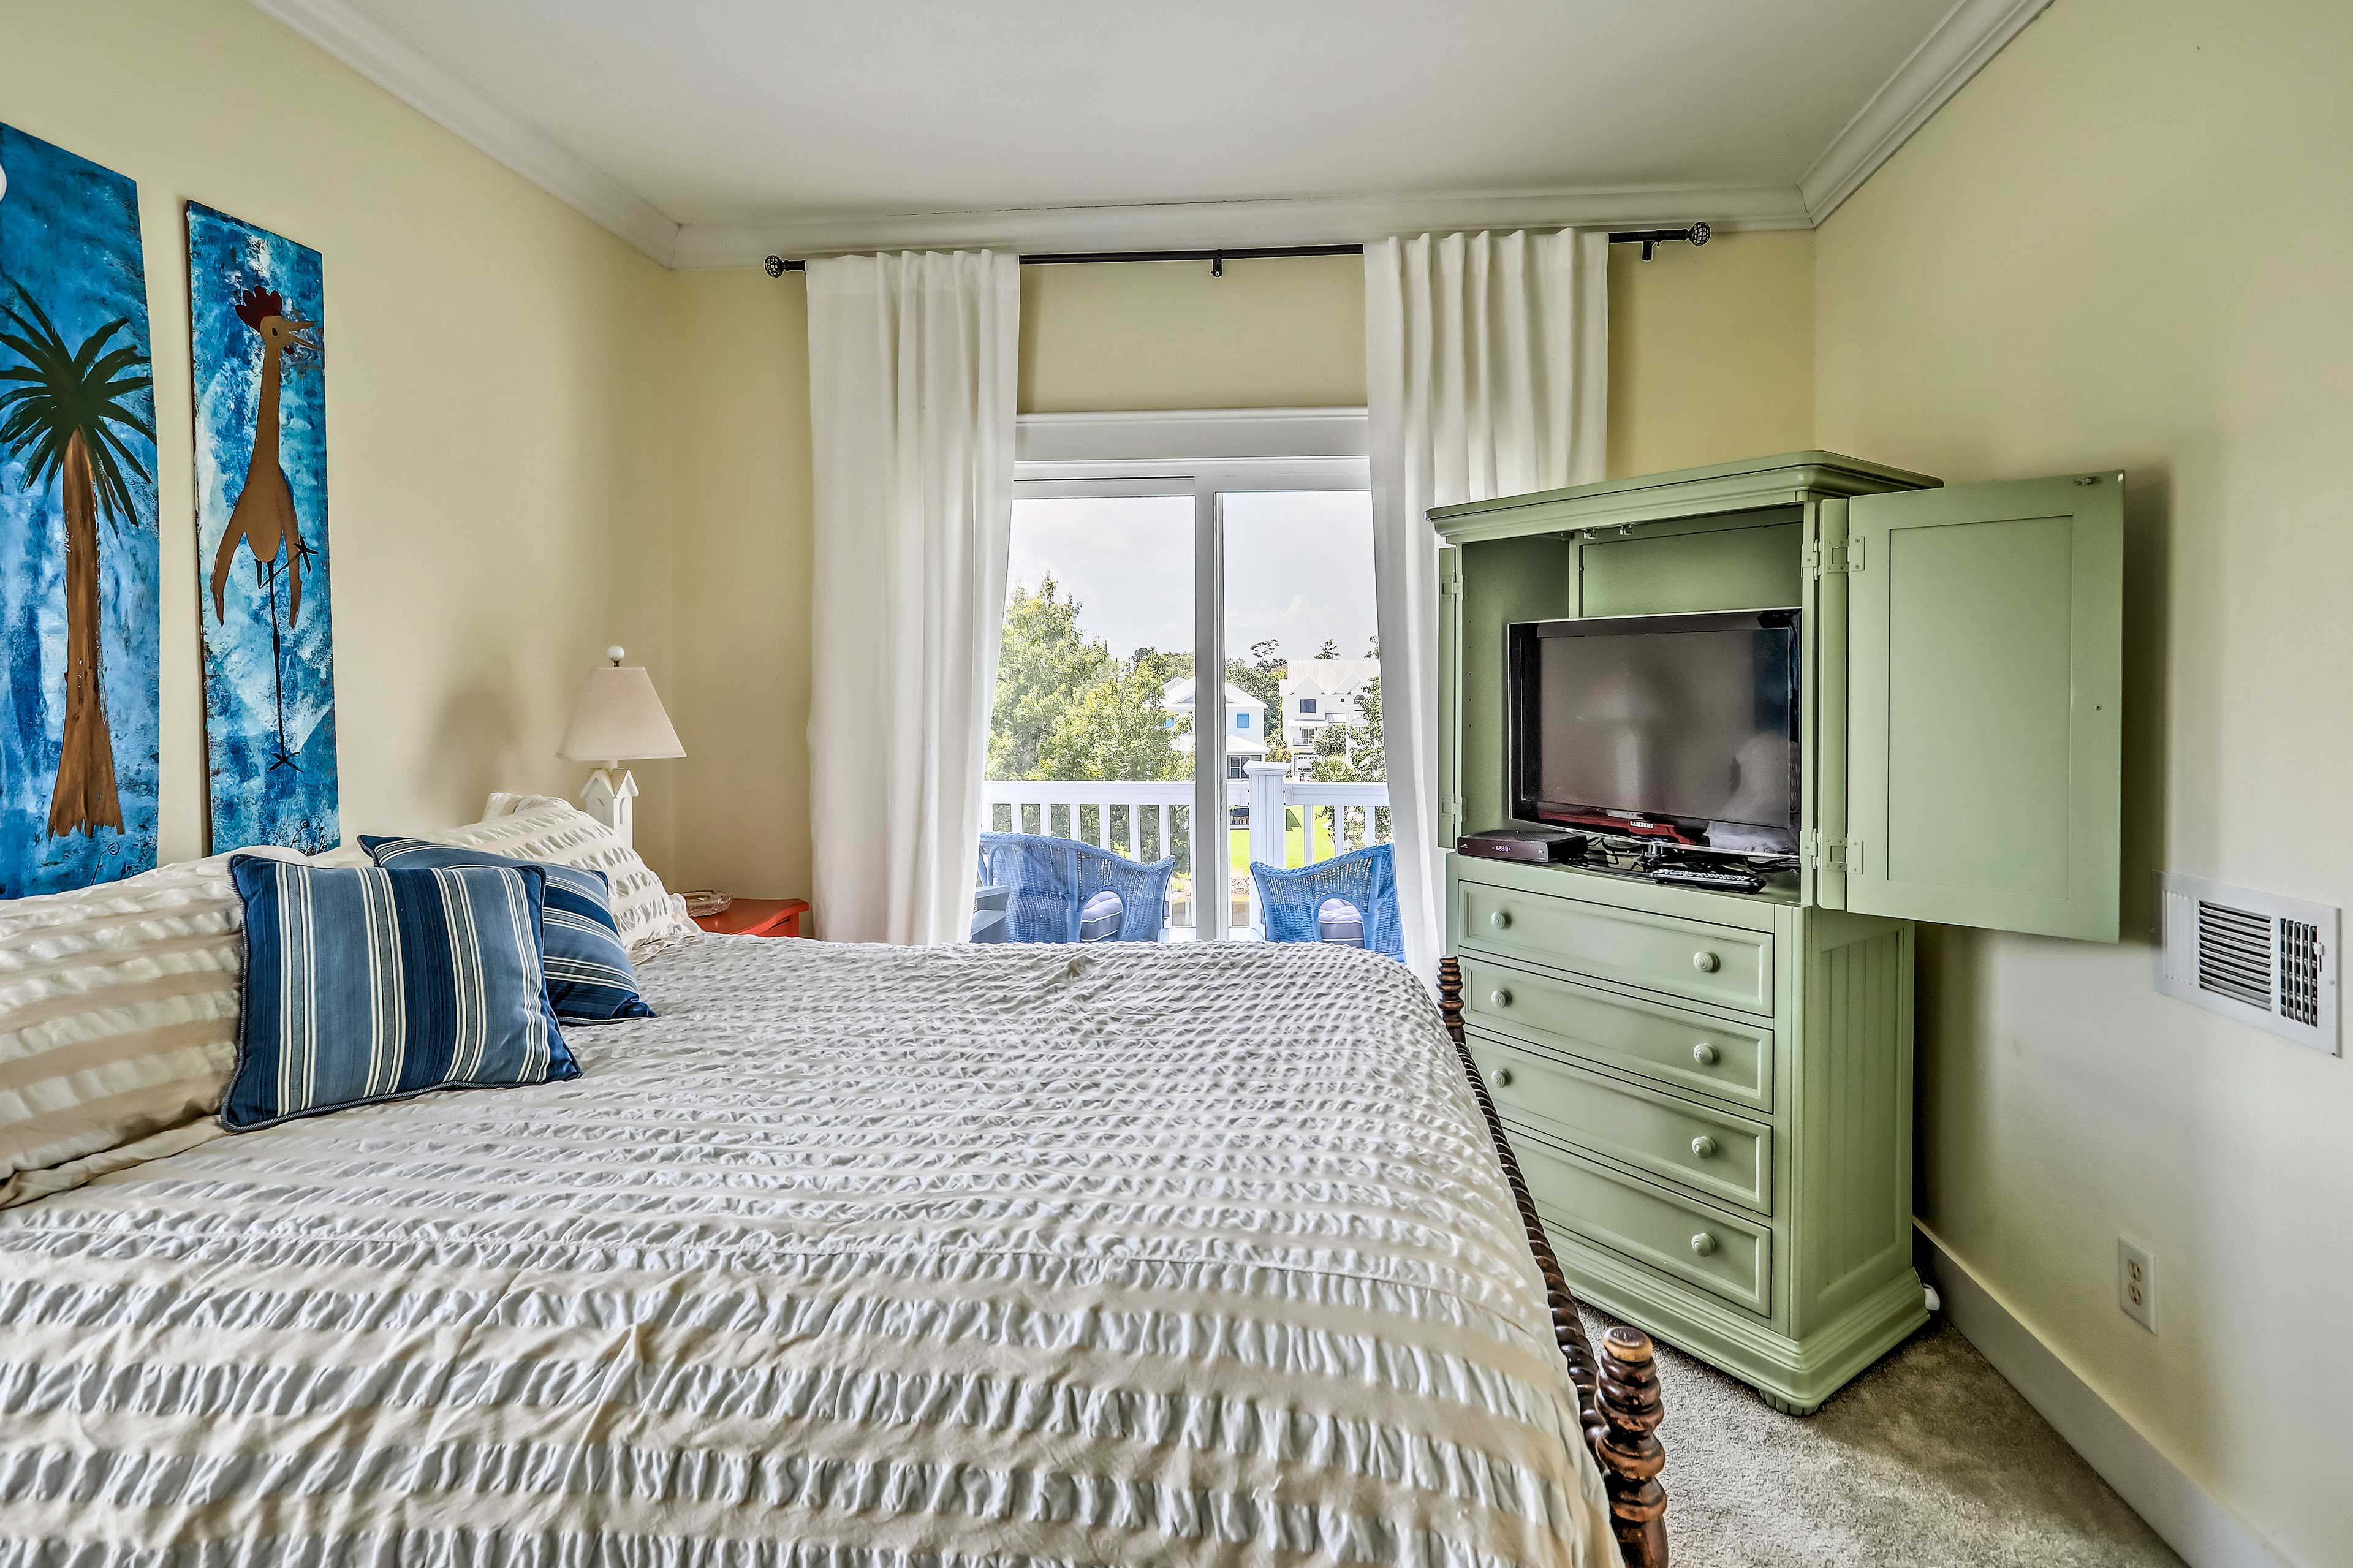 The queen bed, balcony access, and flat-screen TV ensure you'll be comfortable.